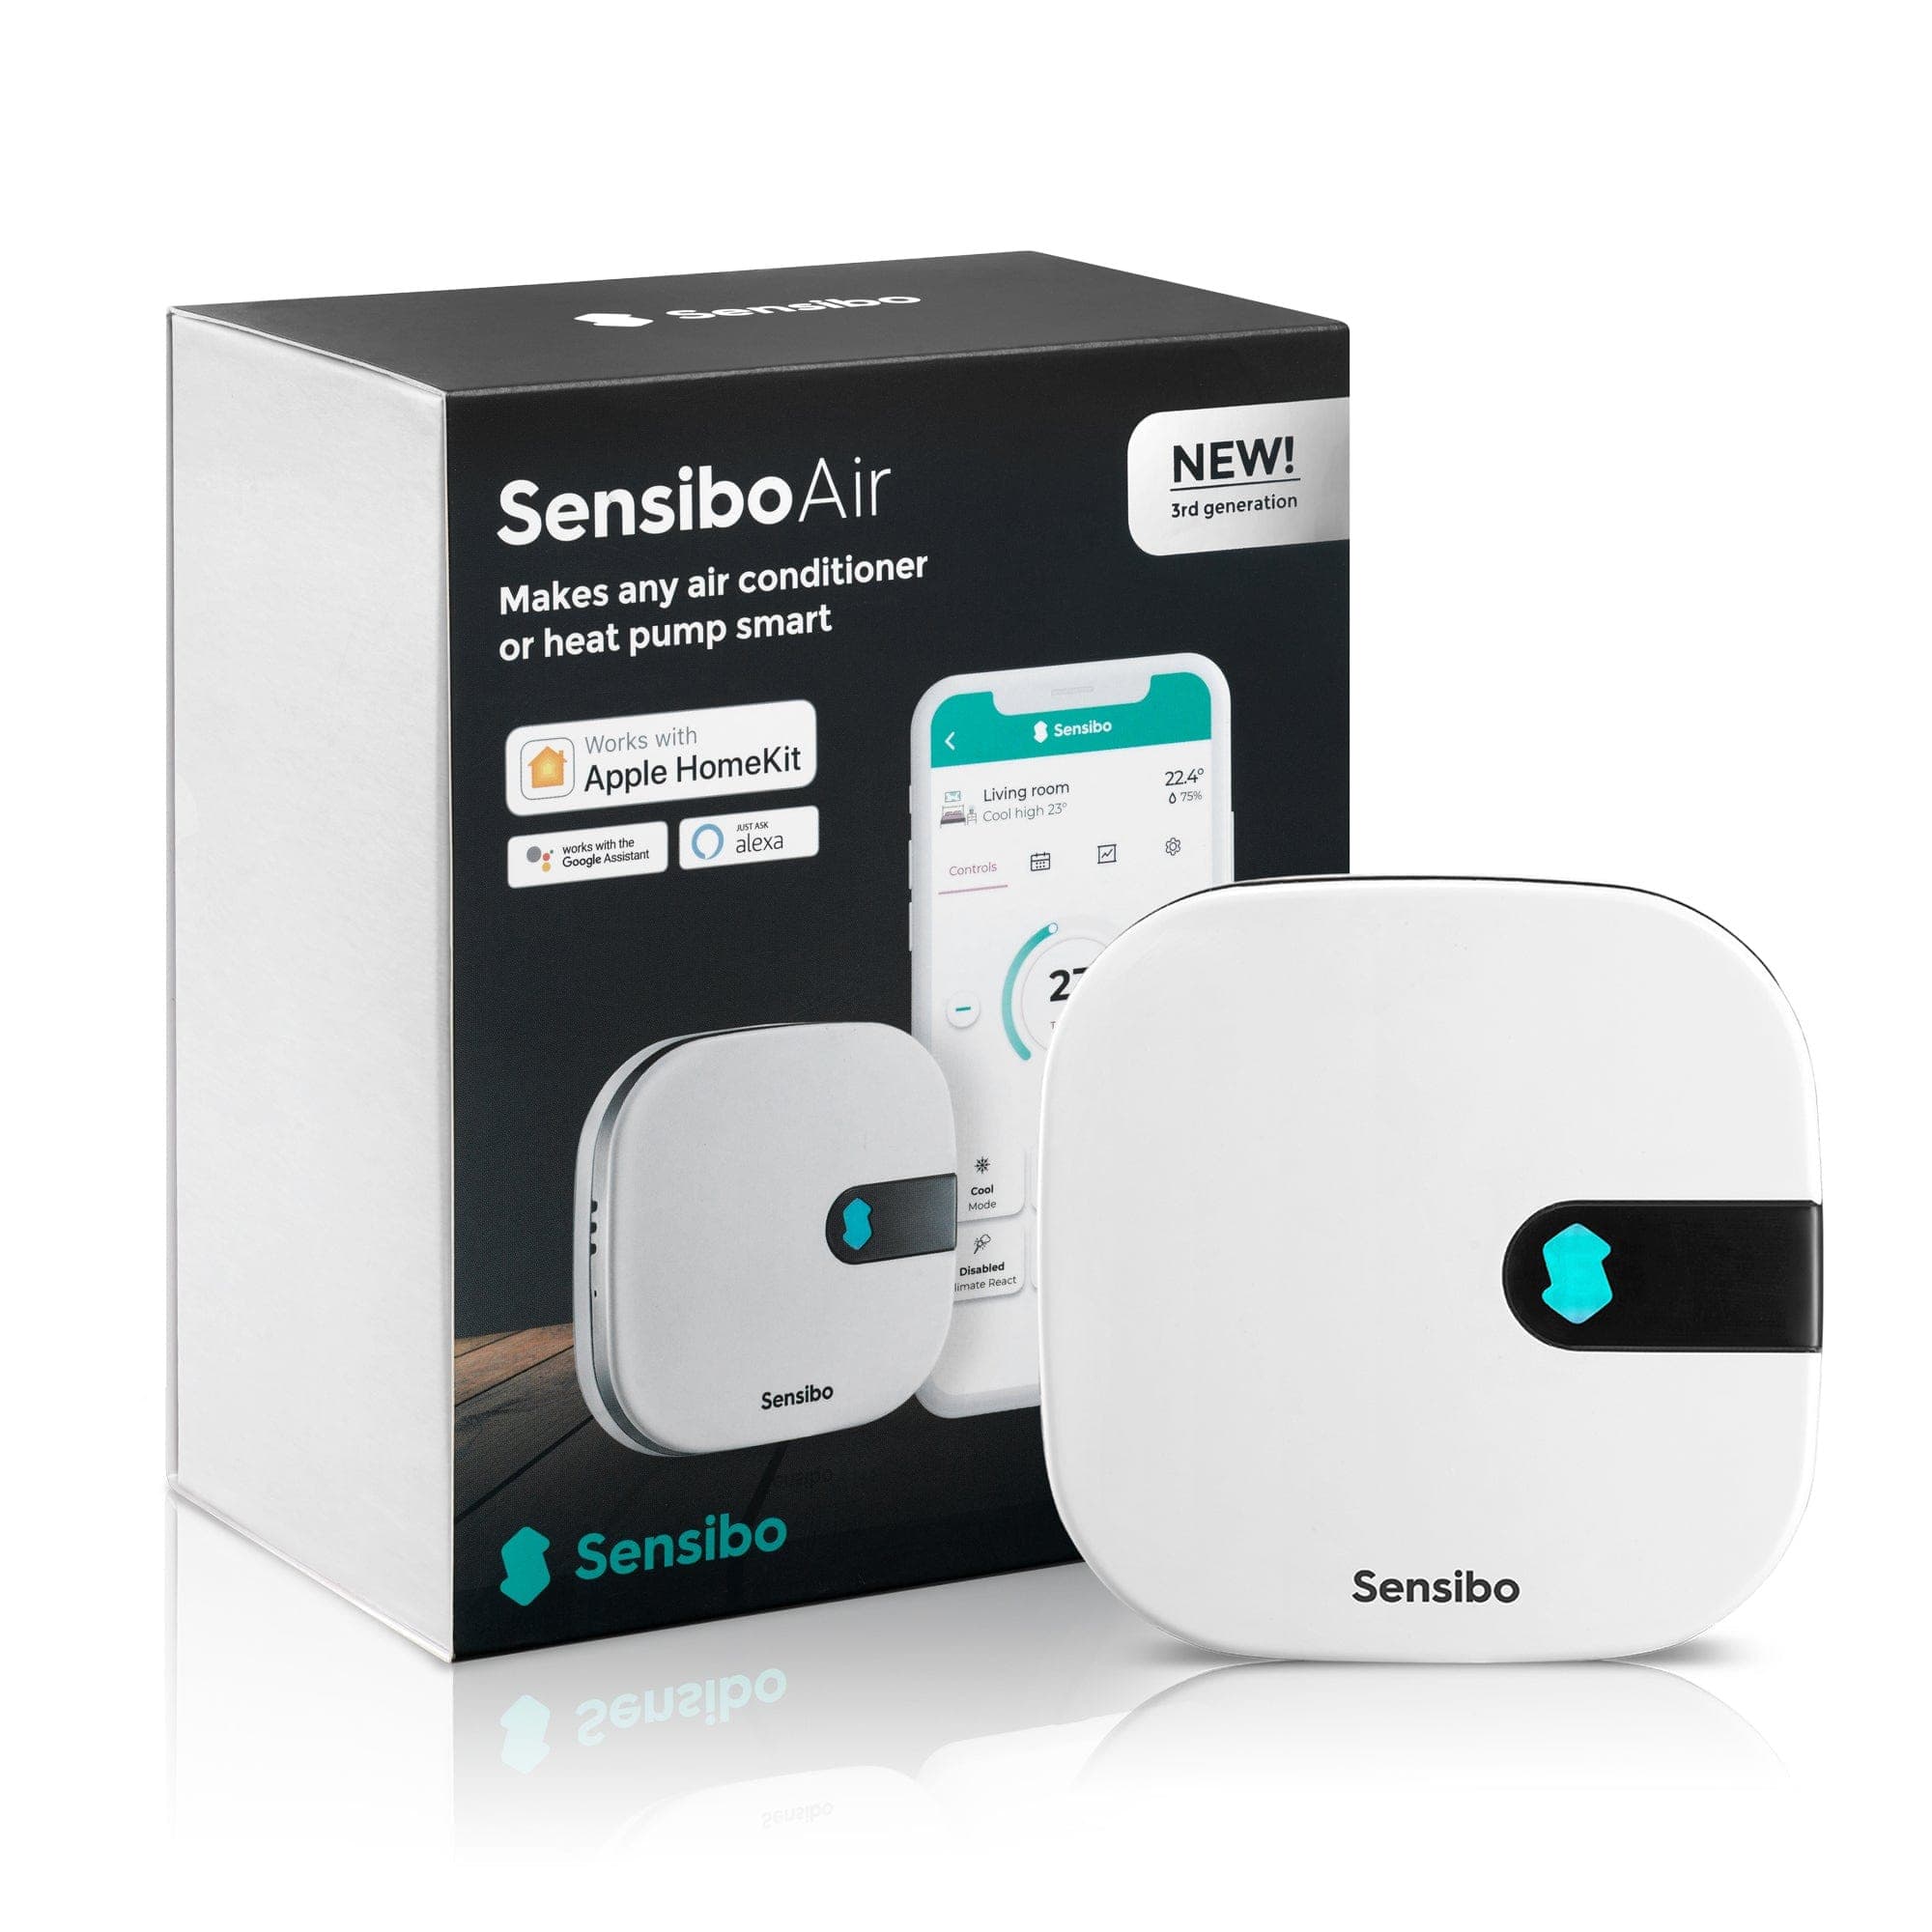 Sensibo has a new gadget, and it will tell you how polluted your